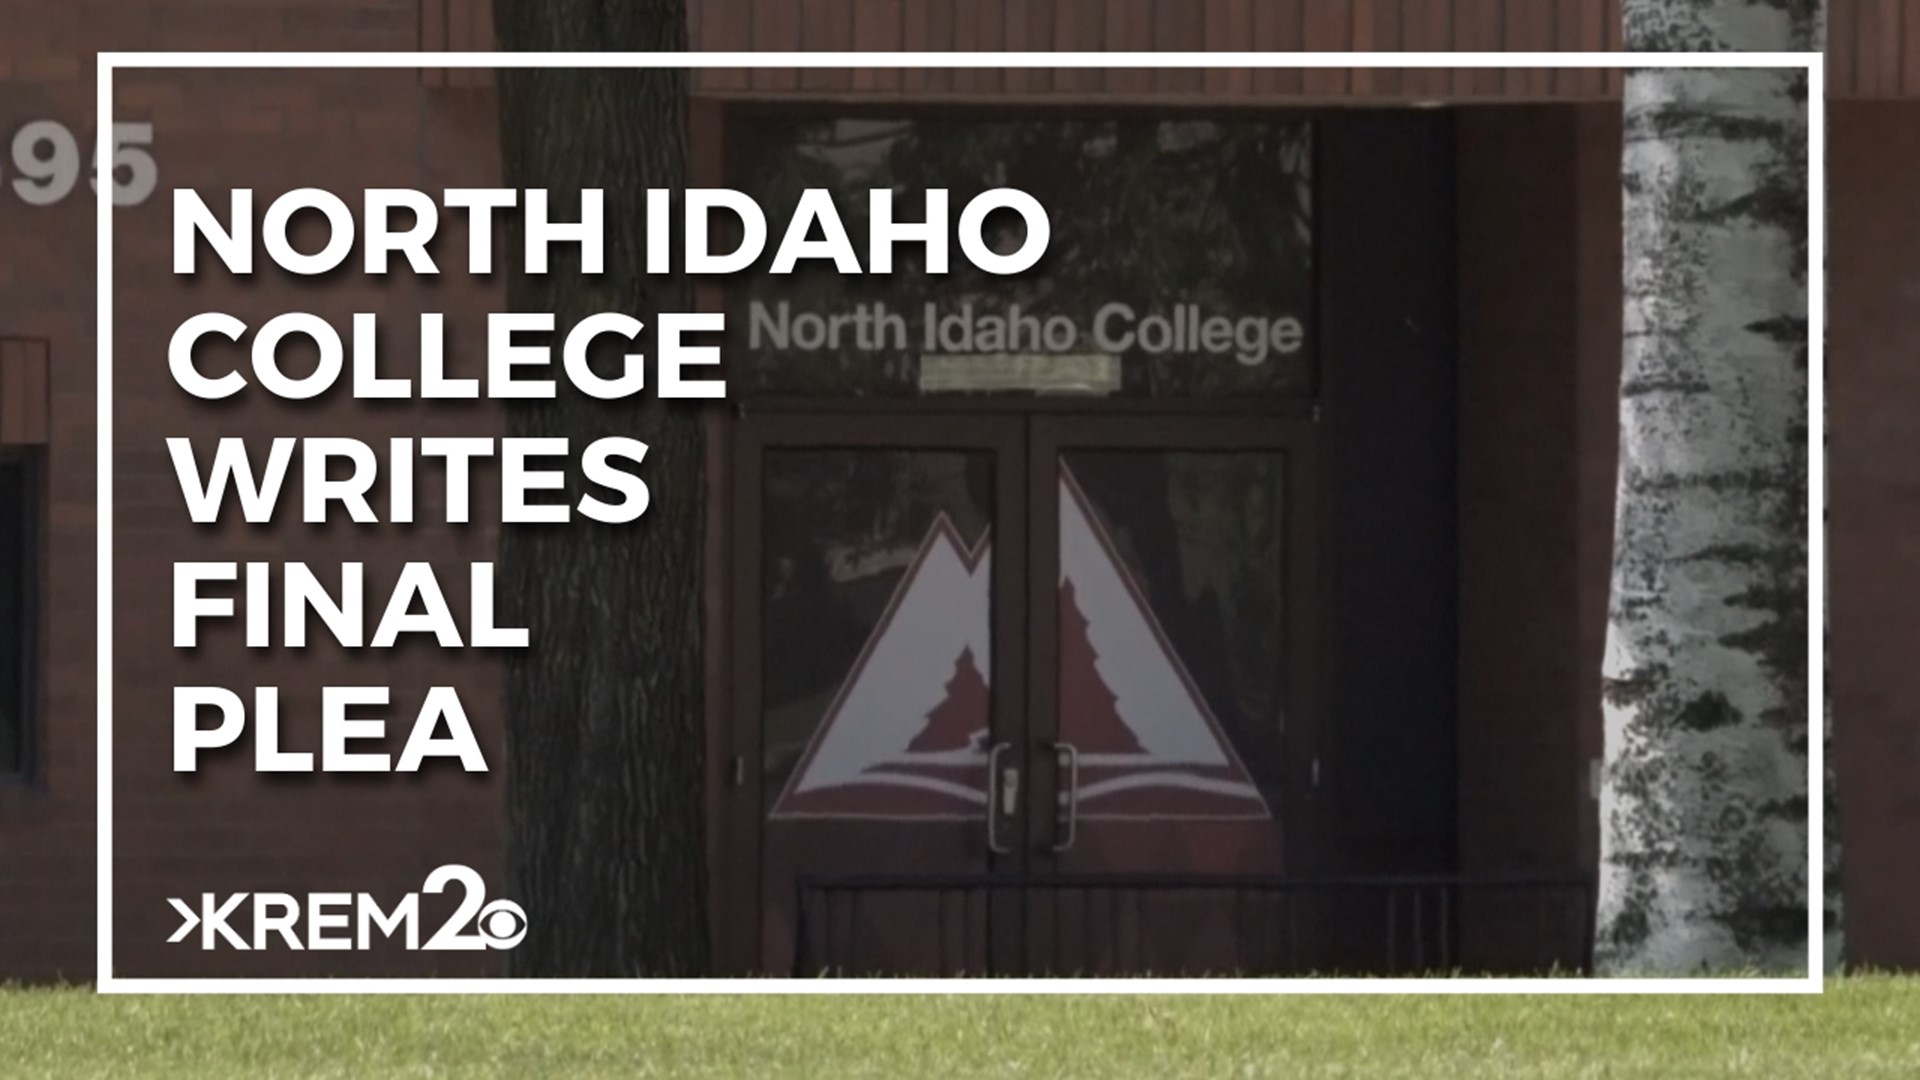 The North Idaho College board will write one final plea before the NWCCU reviews and determines an accreditation status.